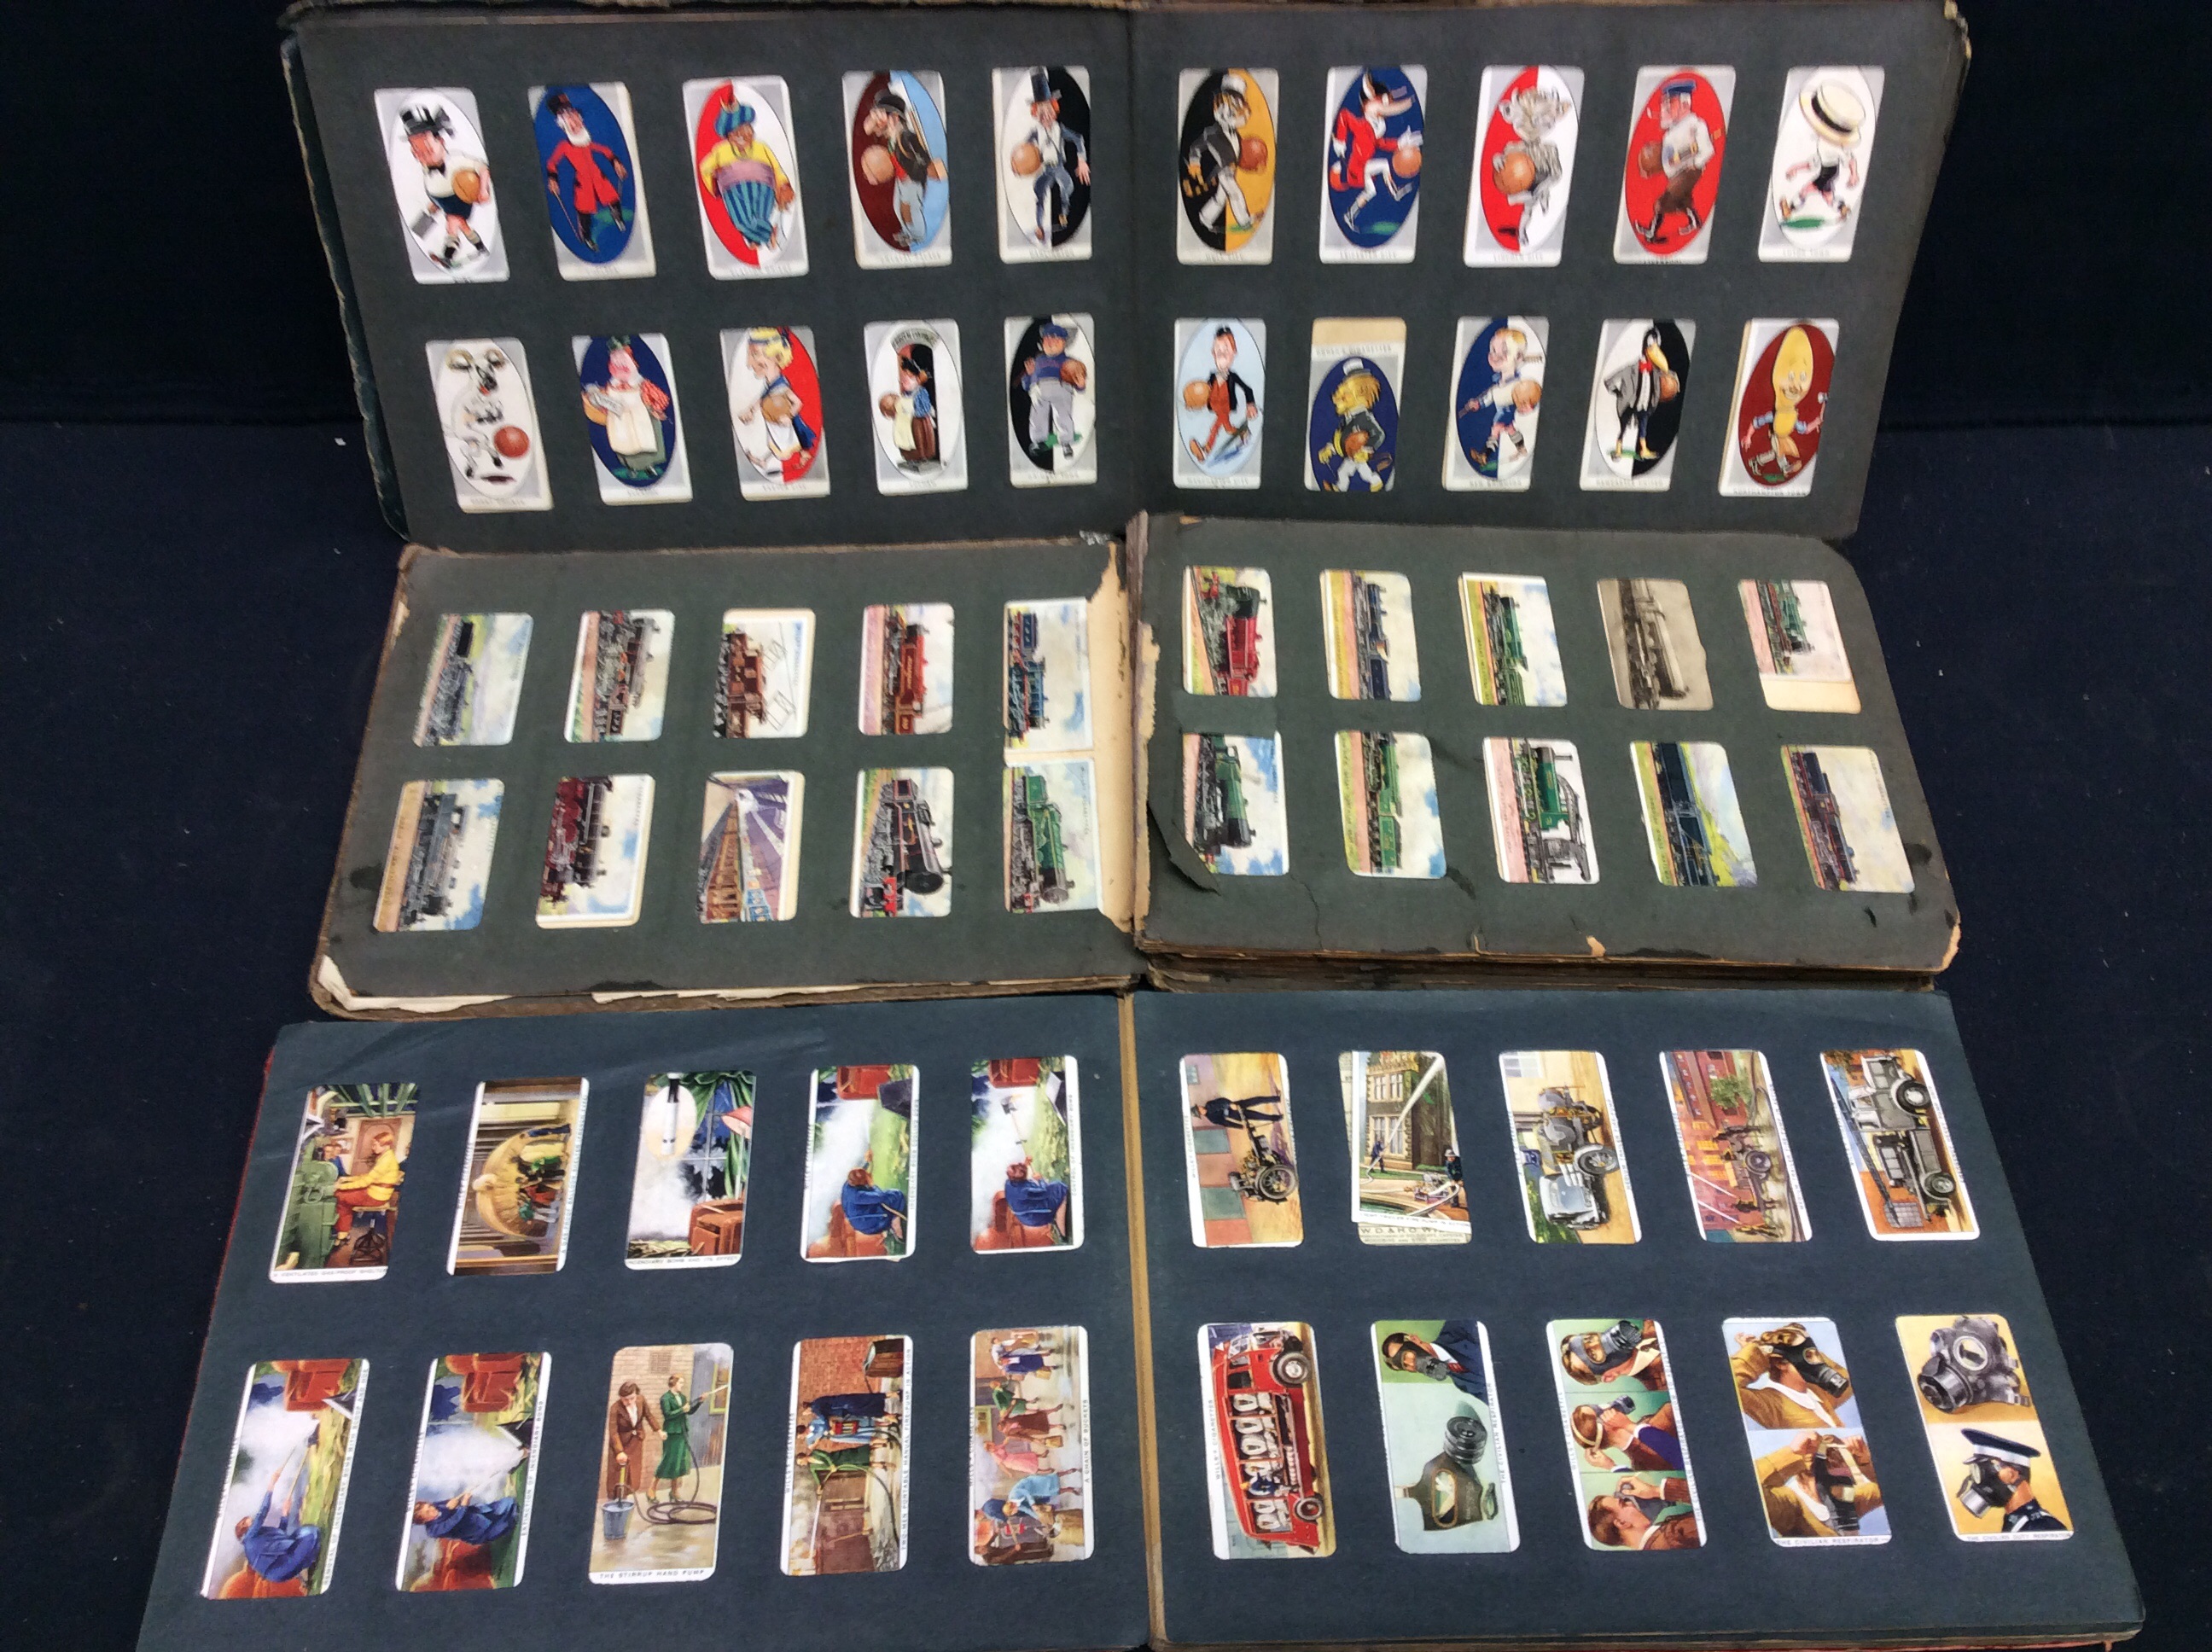 Ogden's A.F.C. Nicknames: a full series of 50 cigarette cards in an album, together with further - Image 2 of 4